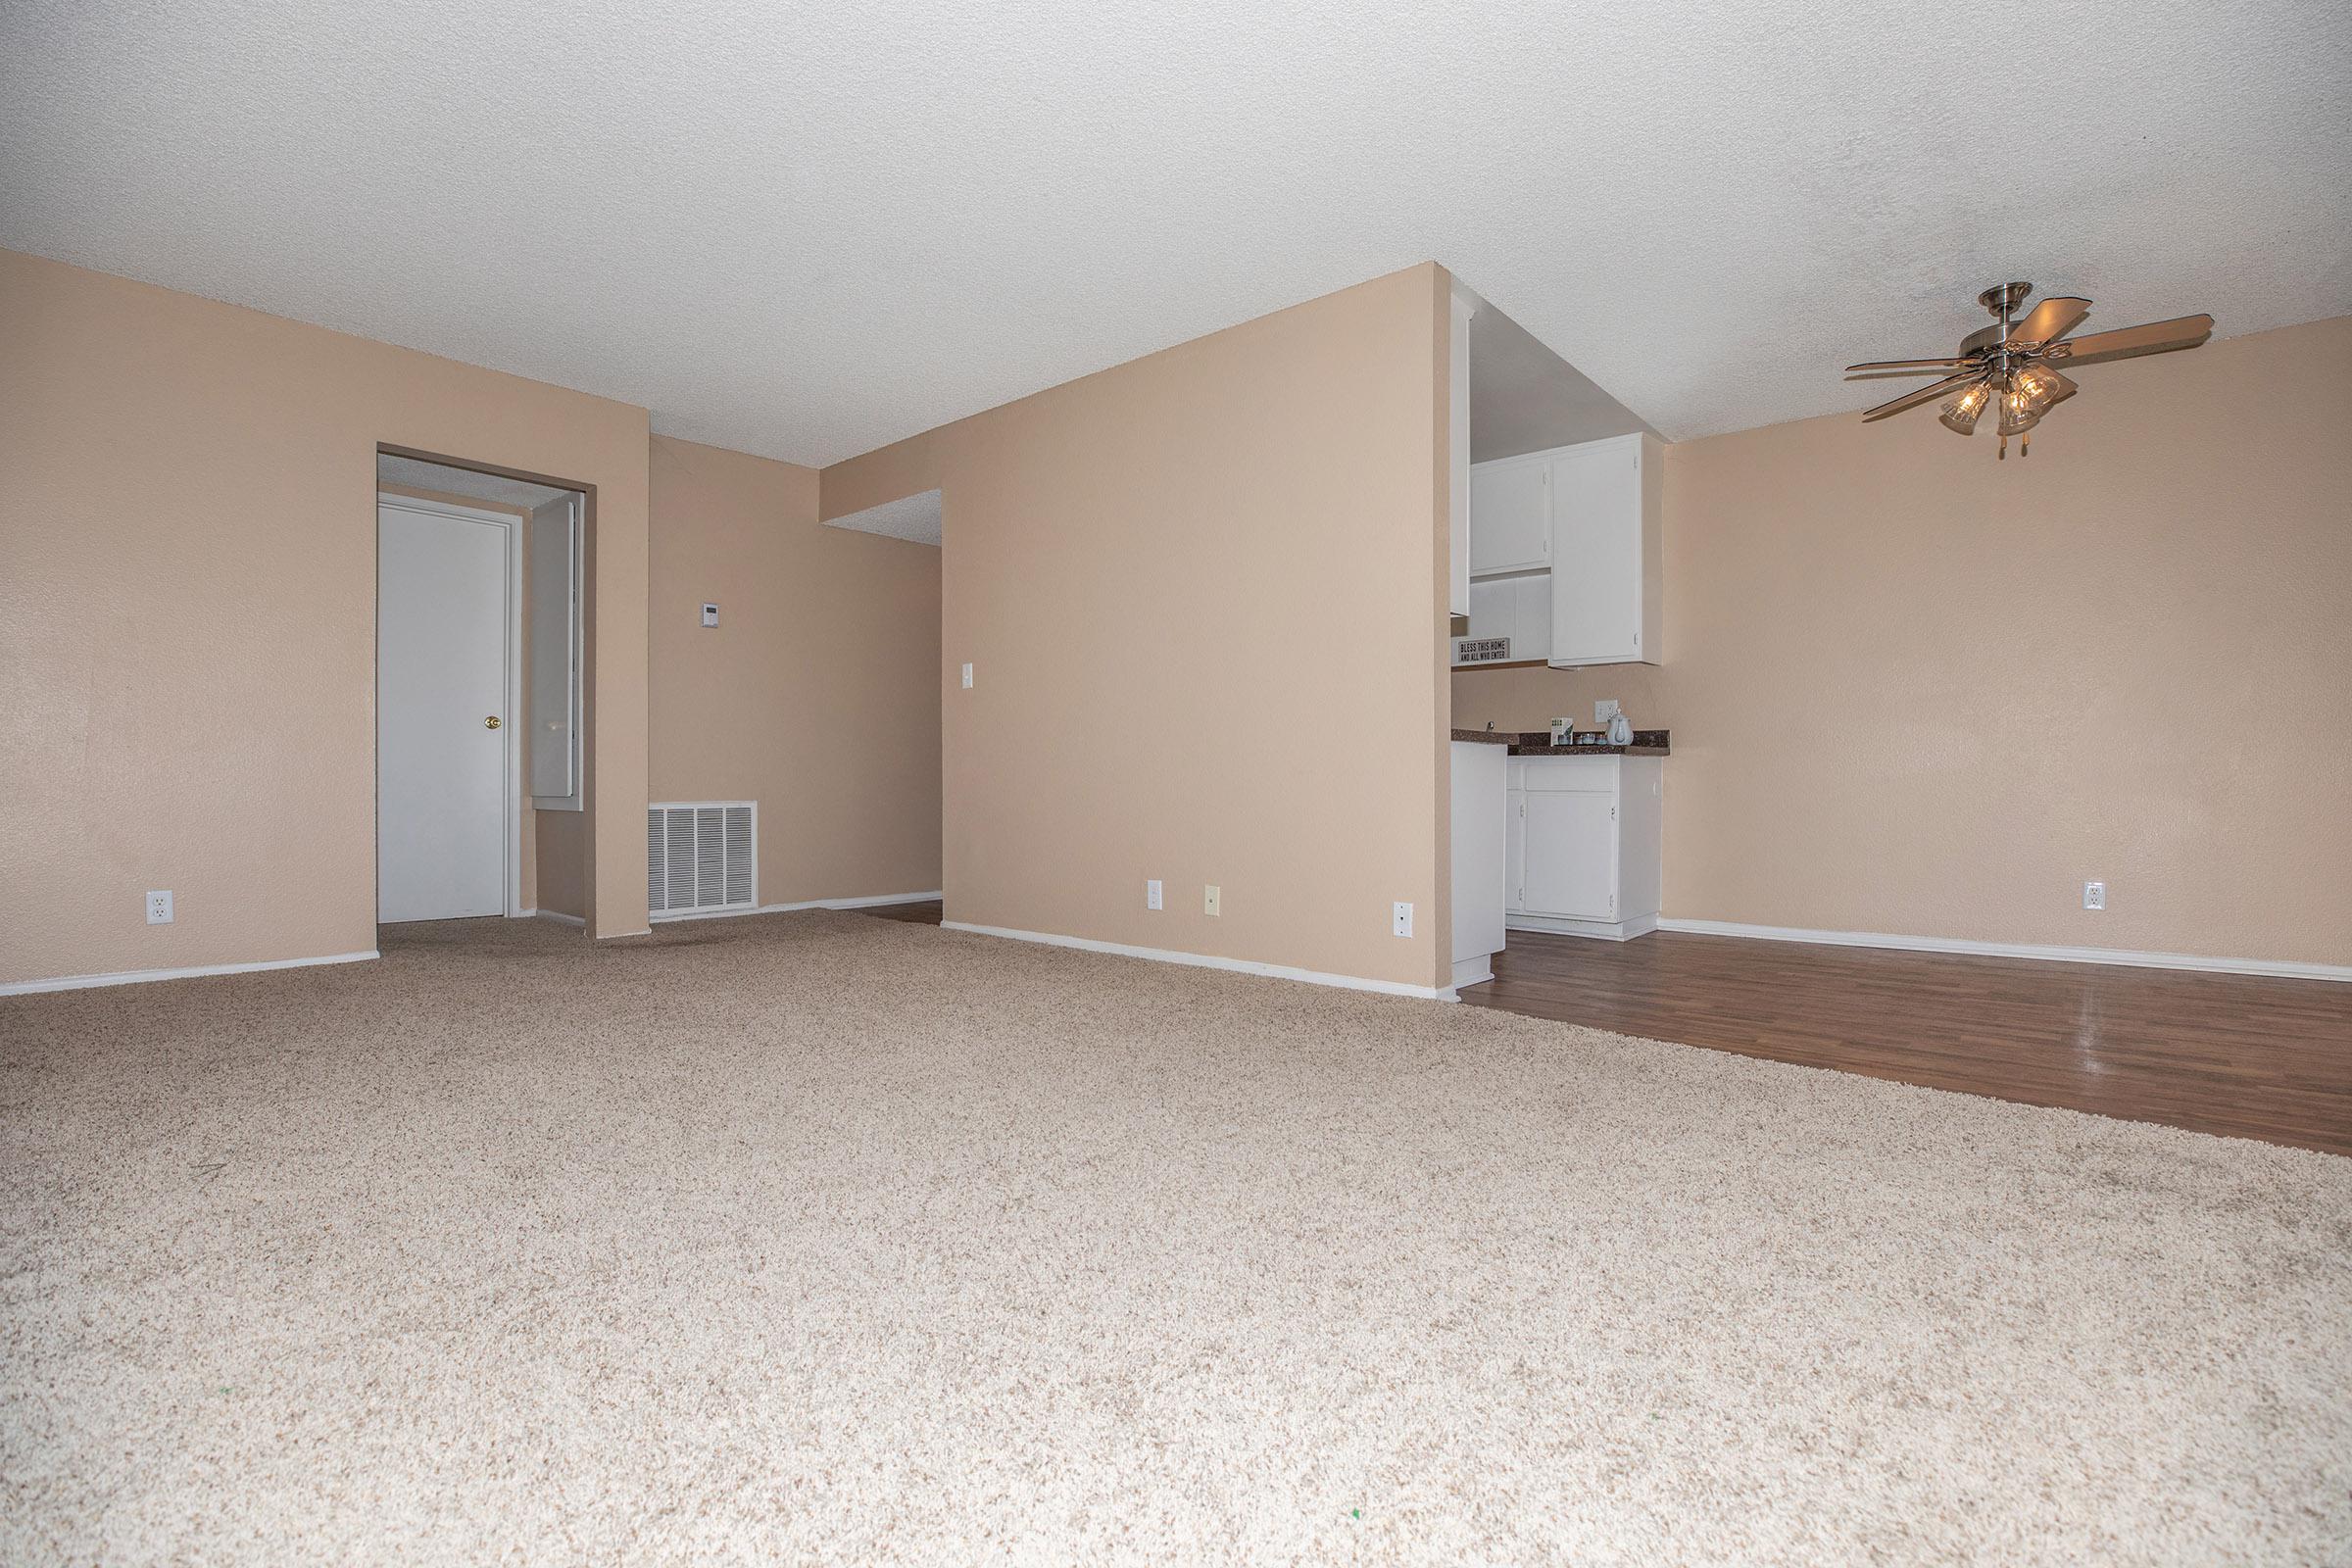 Unfurnished apartment with carpets